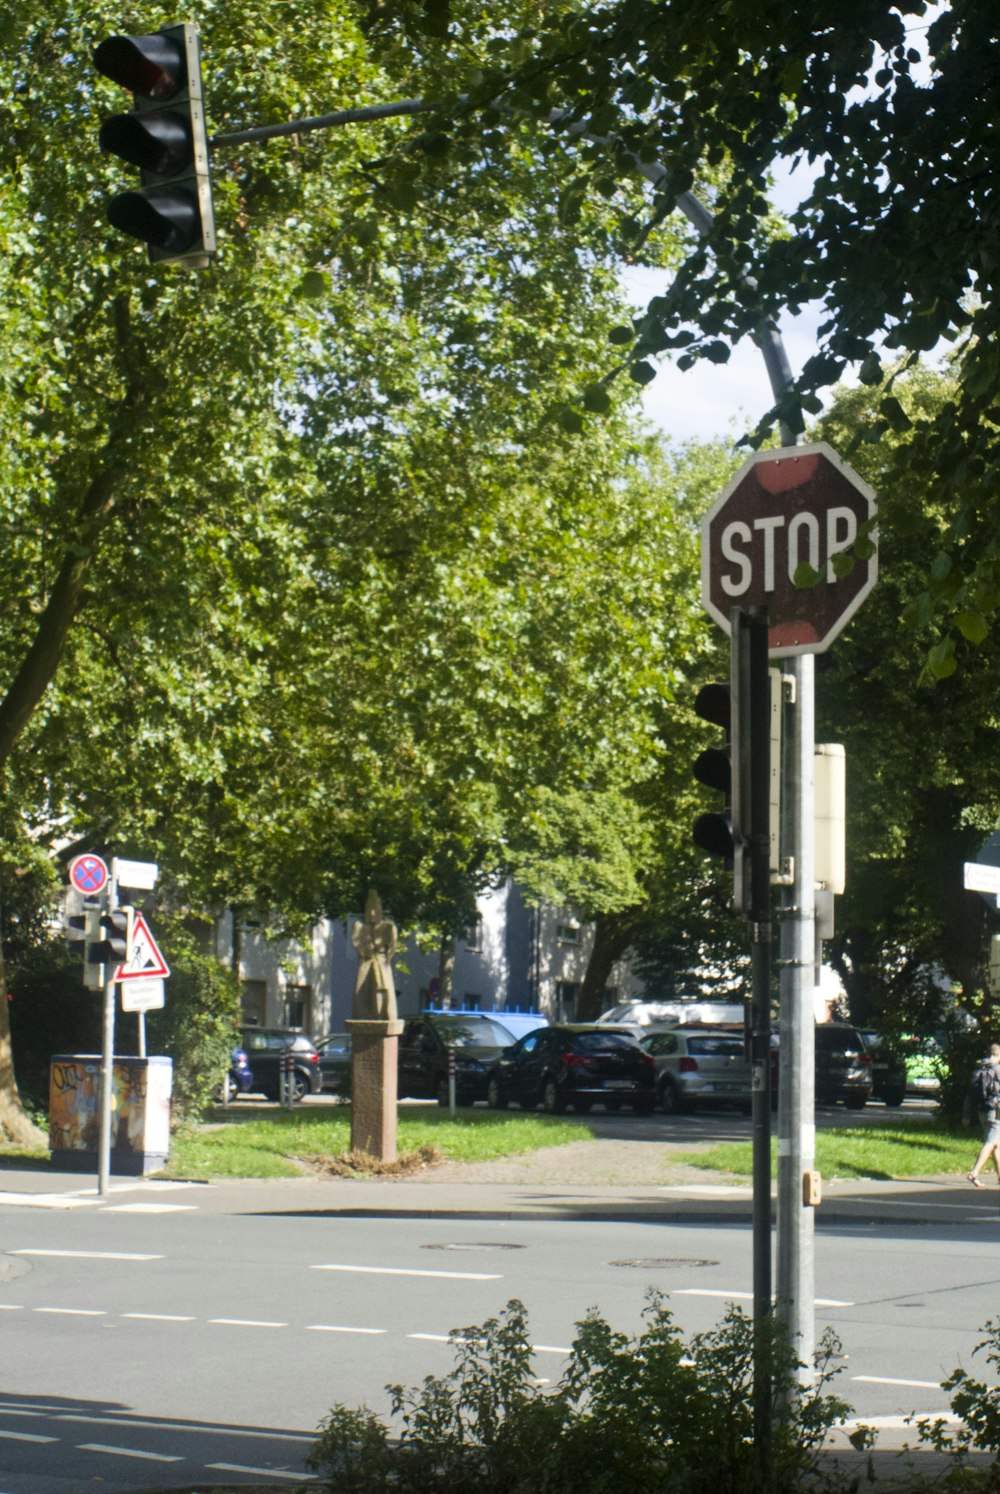 a stop sign at an intersection in a city